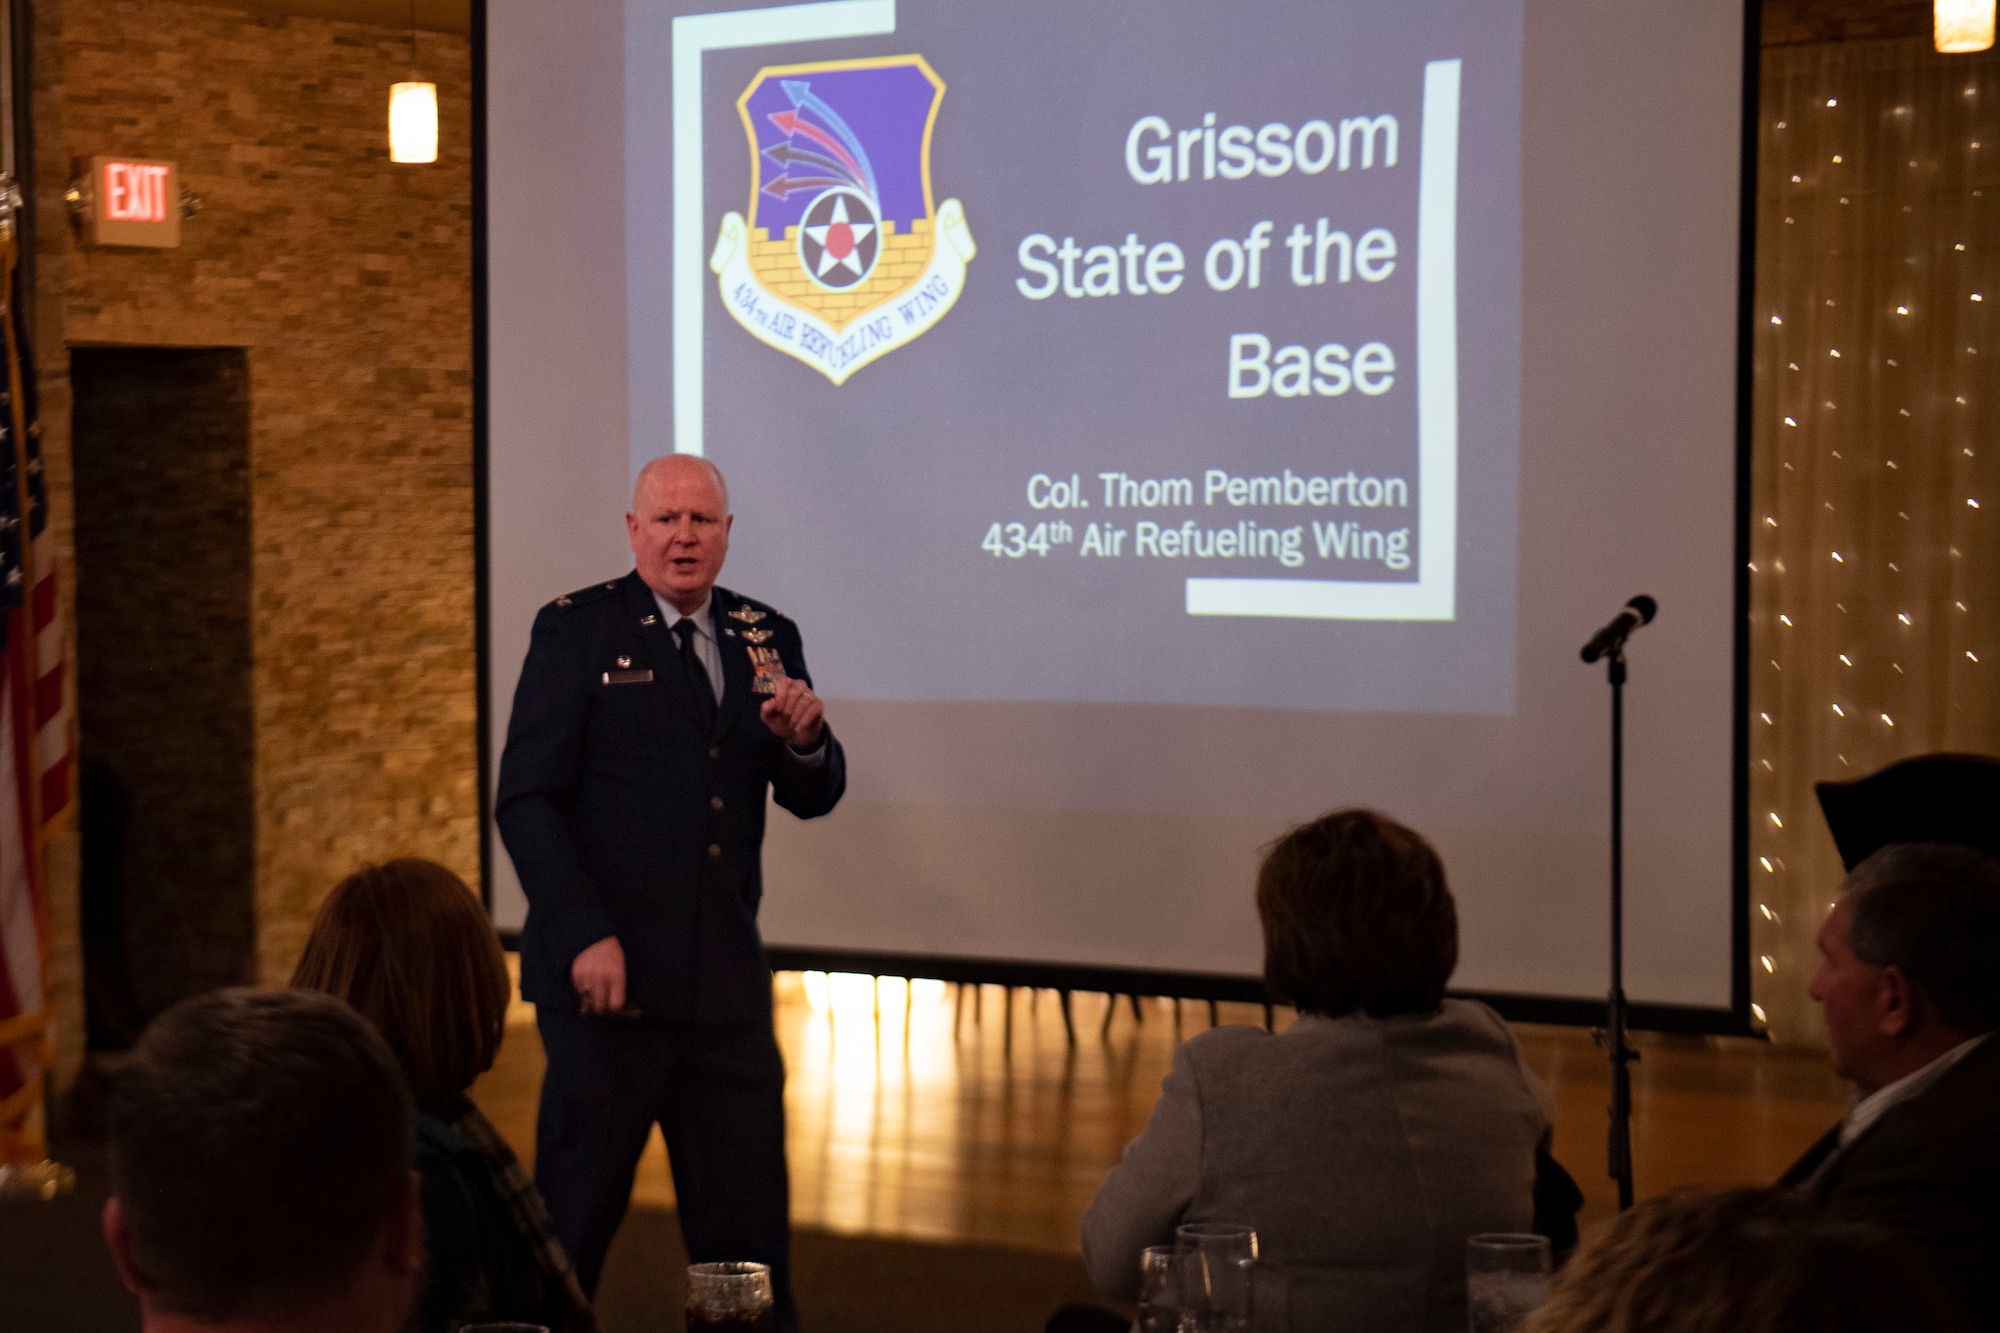 Col. Thom Pemberton 434th Air Refueling Wing commander speaks to members of the Grissom Community Council at the annual State of the Base event on 7 Feb, 2022 in Kokomo, IN. The council is a civilian non-profit organization whose goal is to support the men and women at Grissom. (U.S. Air Force photo by Tech Sgt. Josh Weaver)